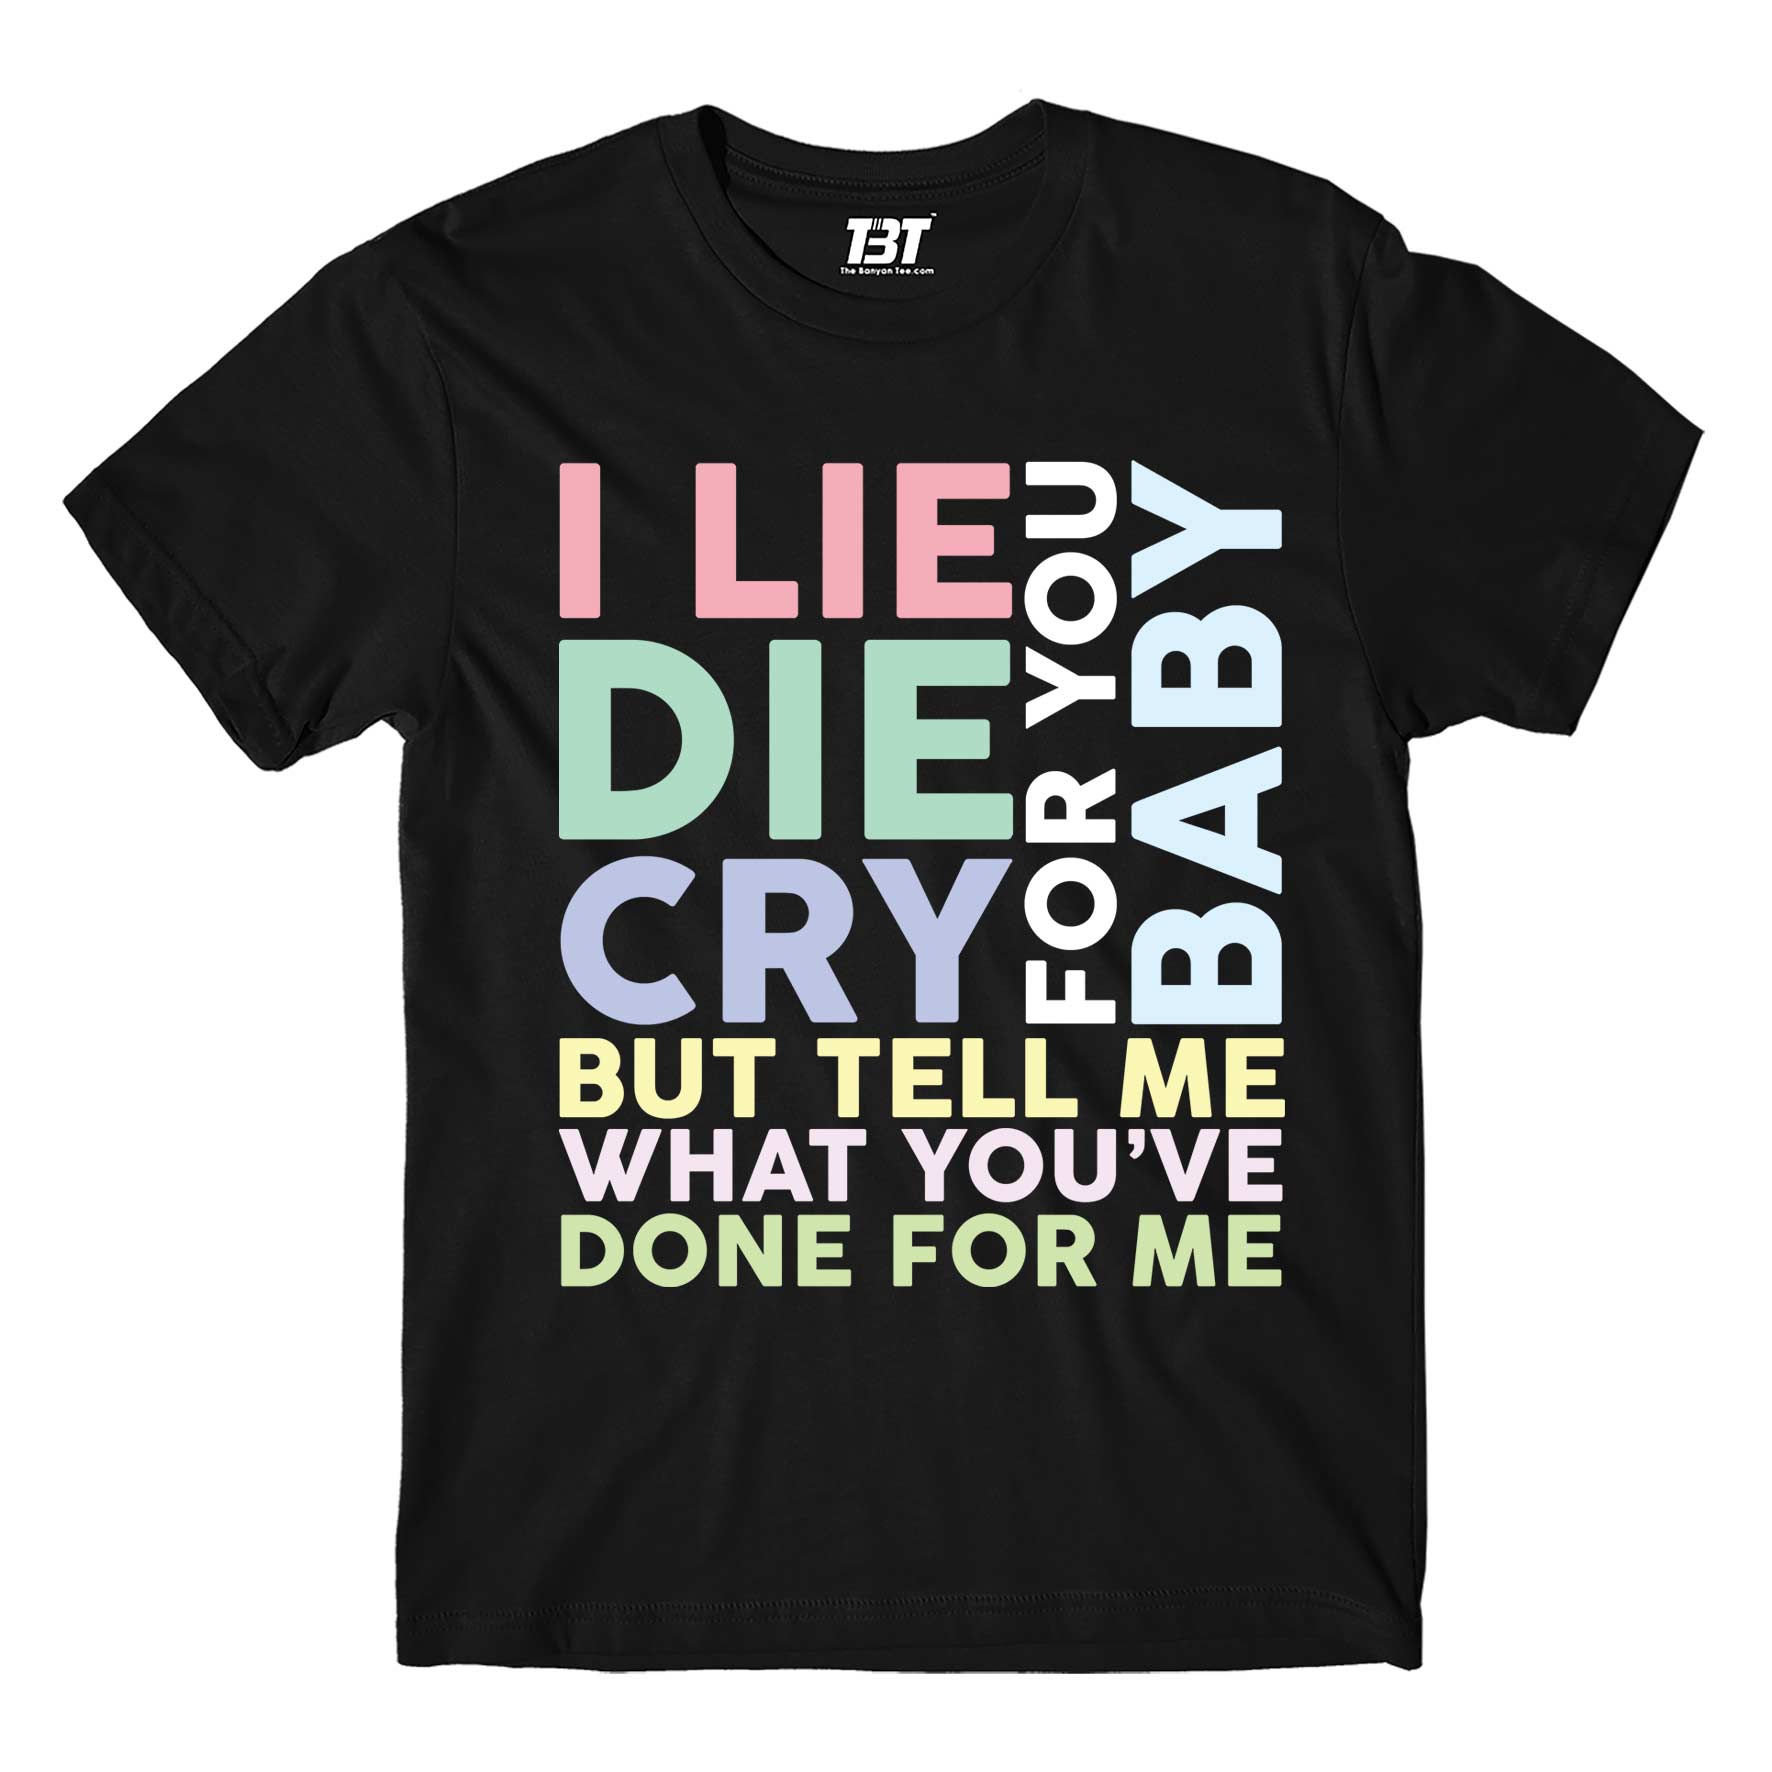 charlie puth done for me t-shirt music band buy online india the banyan tee tbt men women girls boys unisex black i lie for you, baby die for you, baby cry for you, baby but tell me what you've done for me